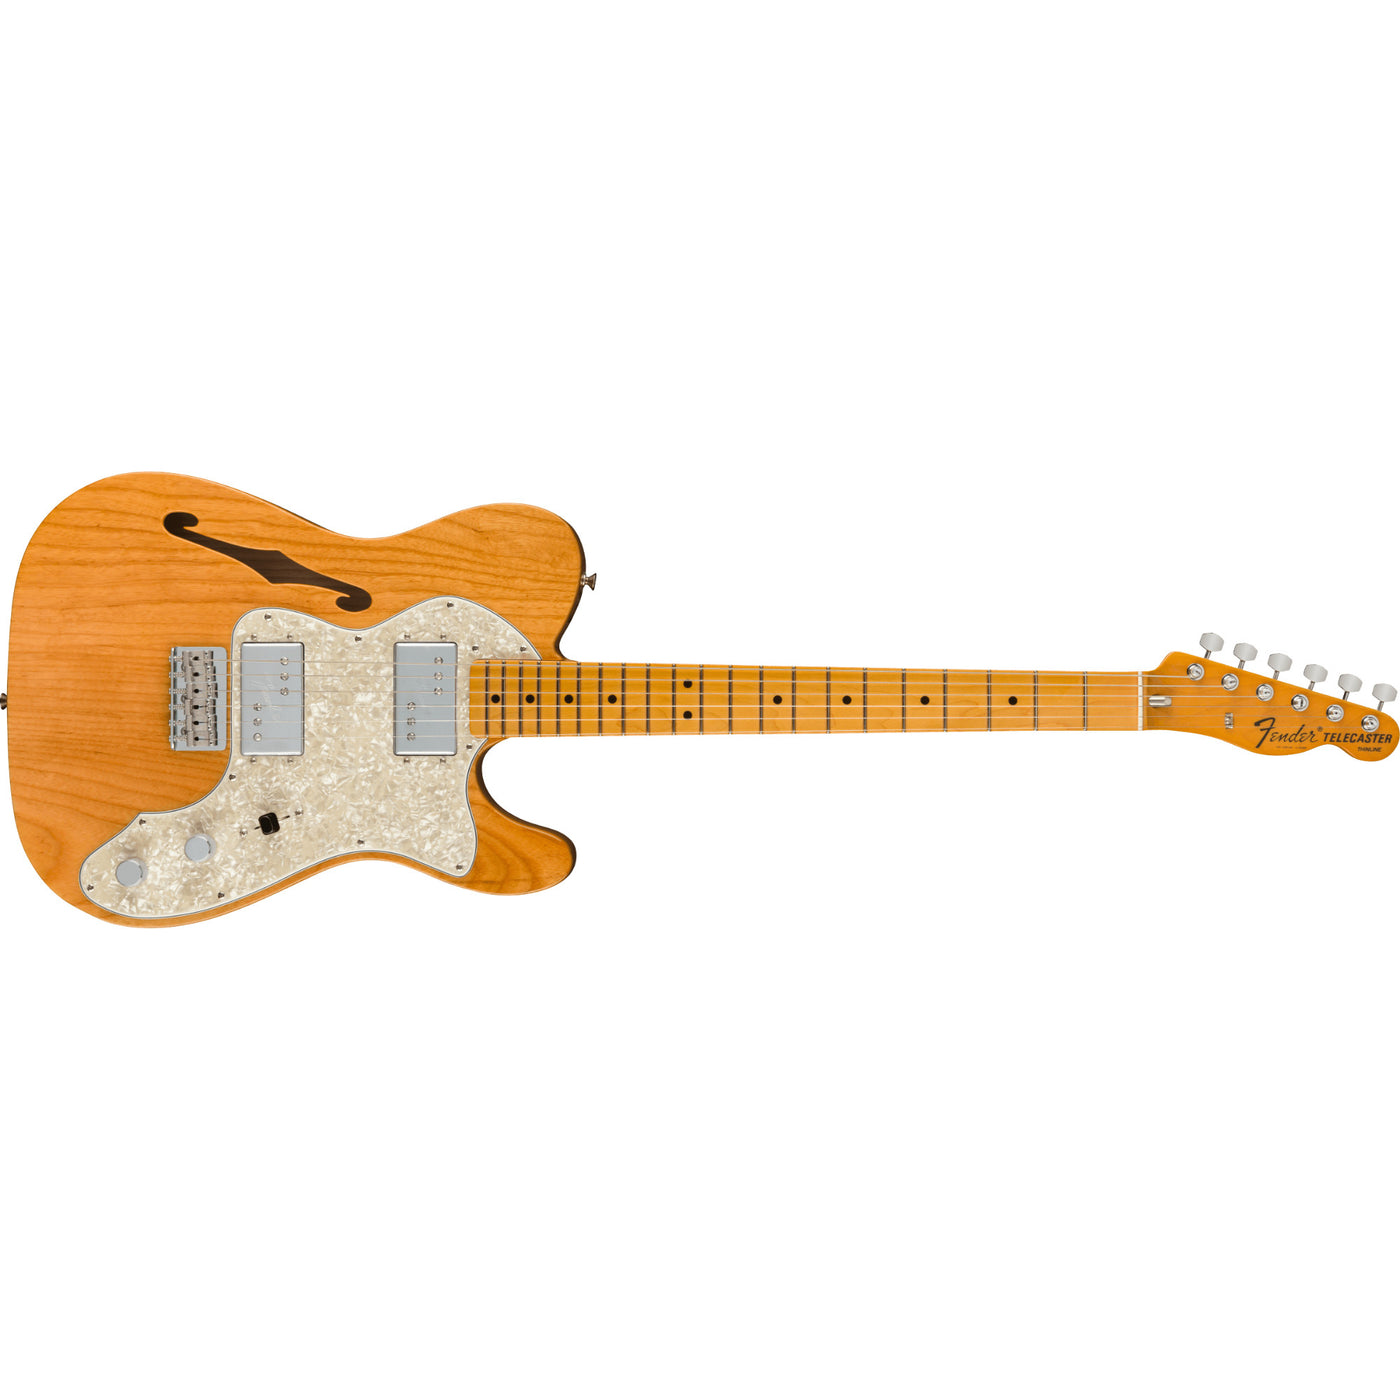 Fender American Vintage II 1972 Telecaster Thinline Electric Guitar, Aged Natural (0110392834)